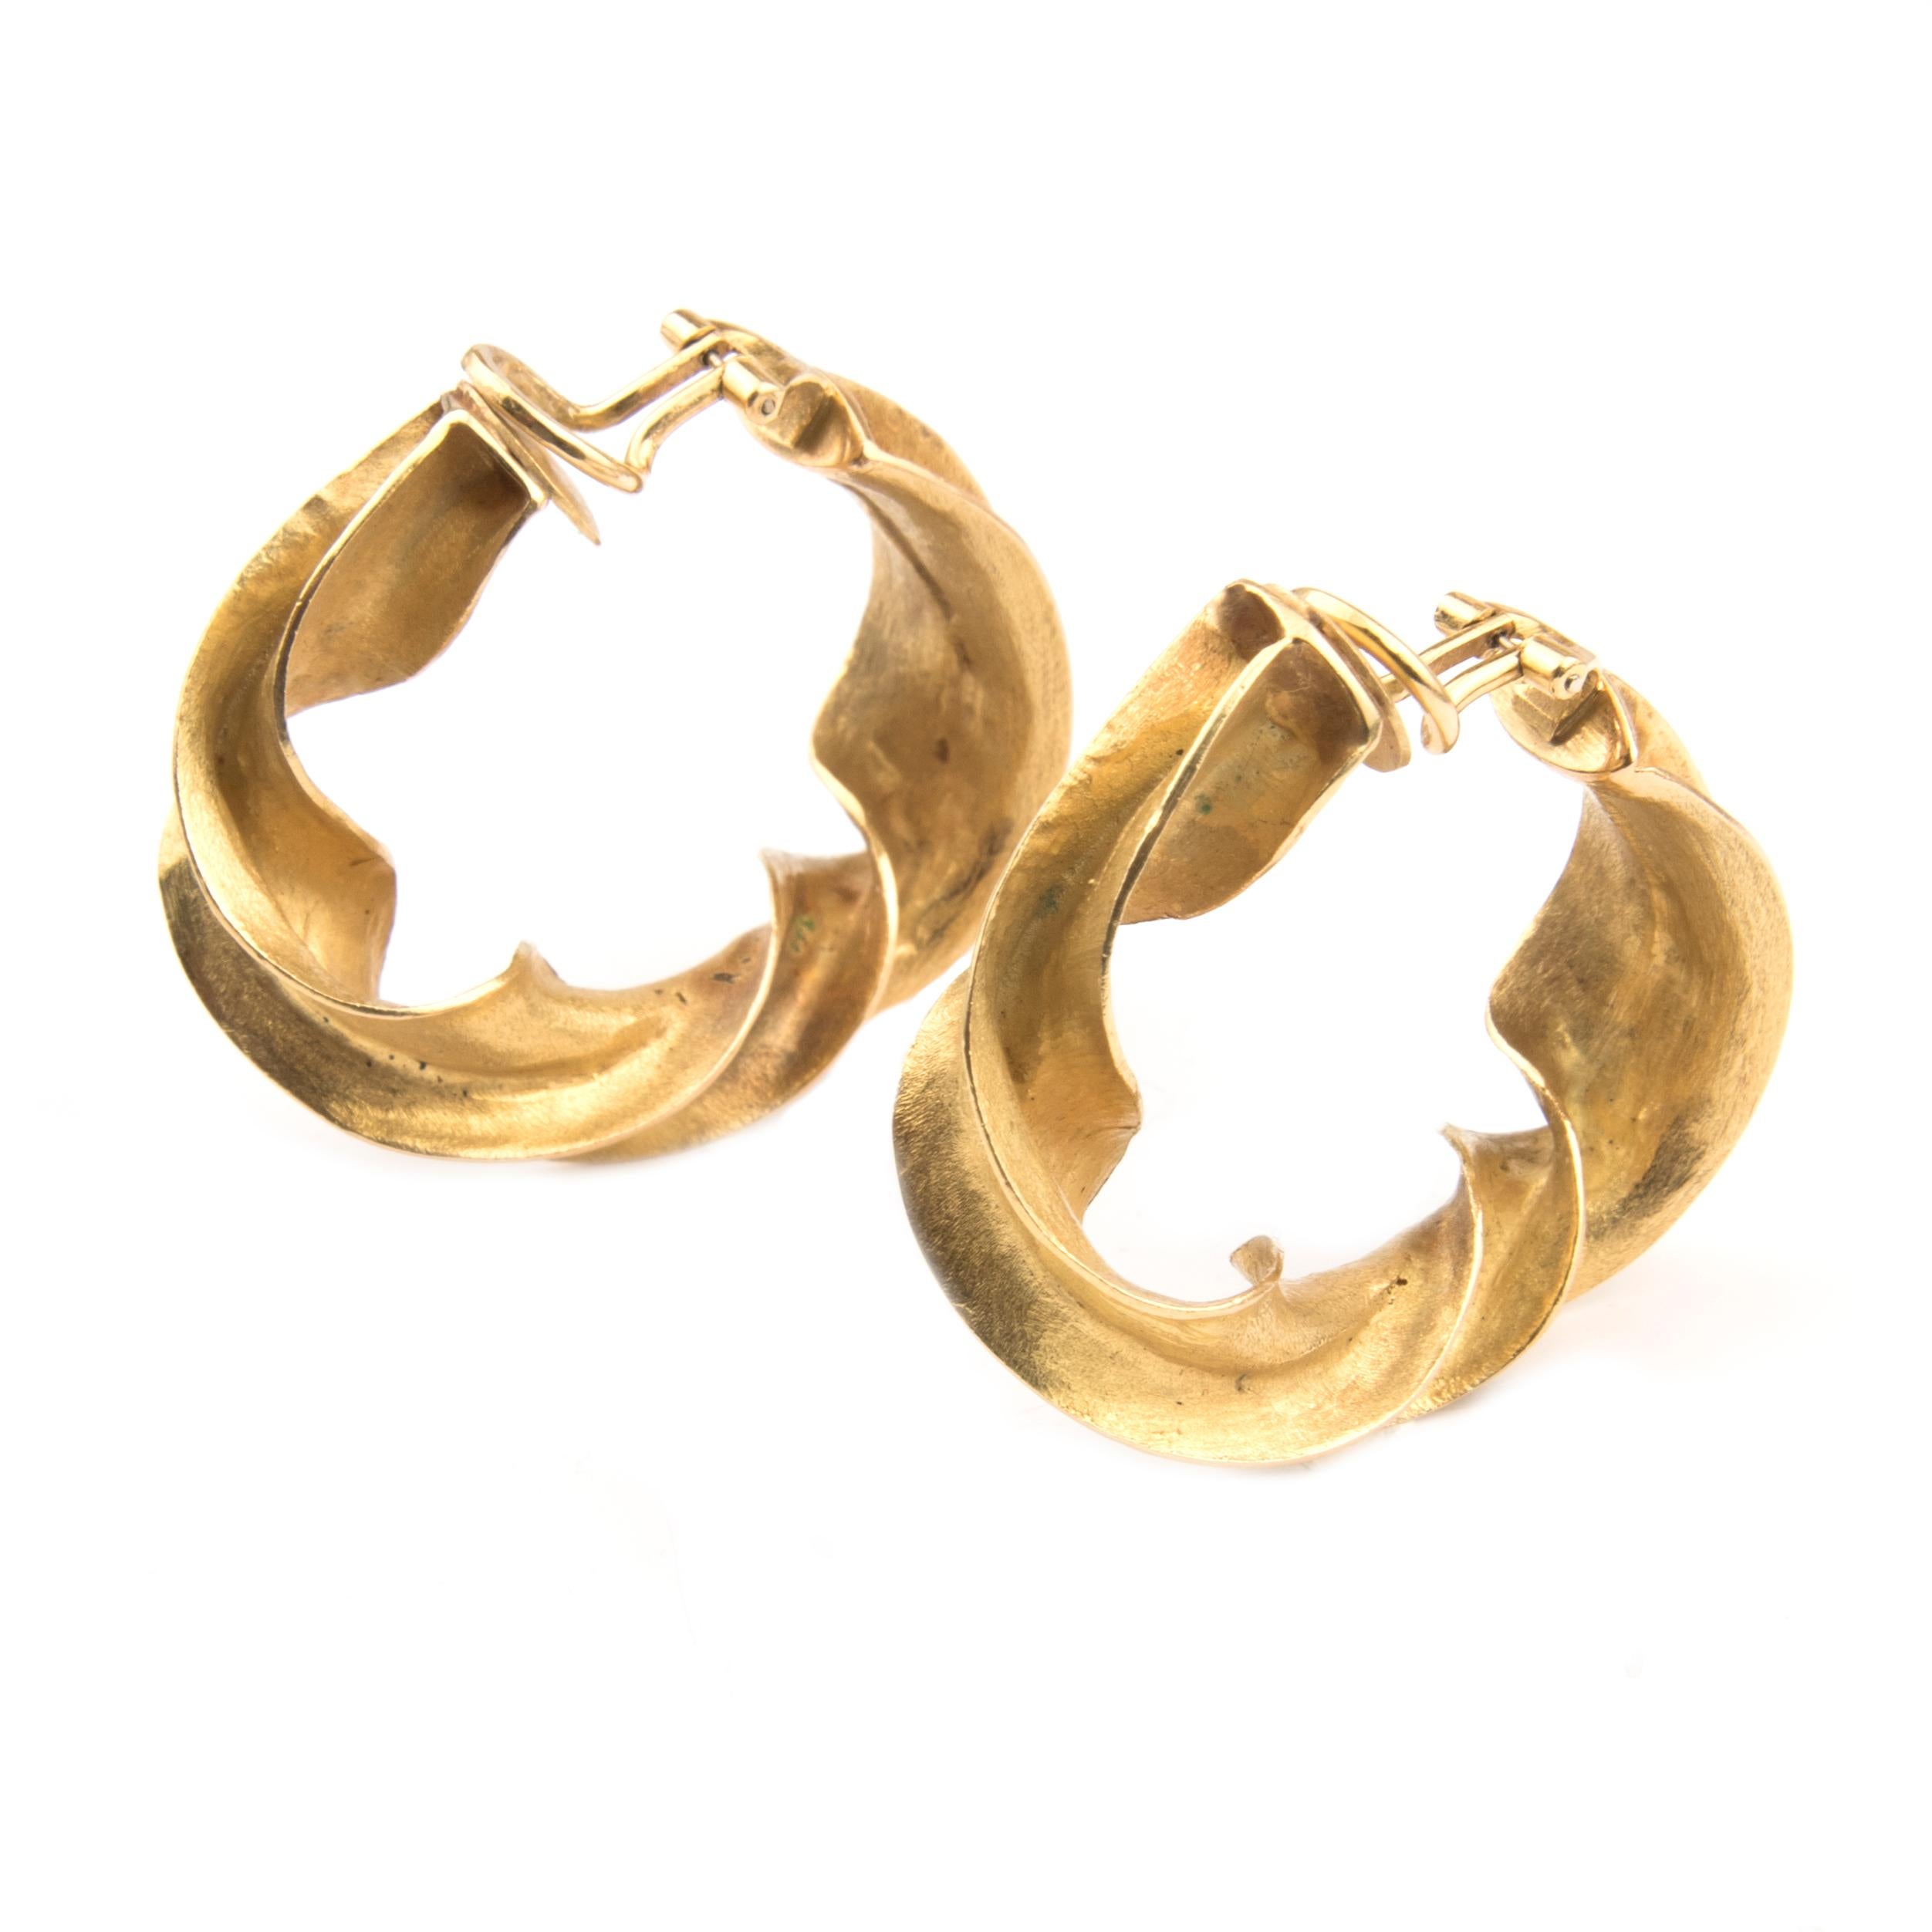 Pair of hand made clip-on earrings by Claude Pelletier, matt 18k yellow gold, designed as irregular twisted hoops
Stamped S.F.H, maker's mark CP for Claude Pelletier, French hallmarks
Ca. 1970

Claude Pelletier (1930) is a French goldsmith and